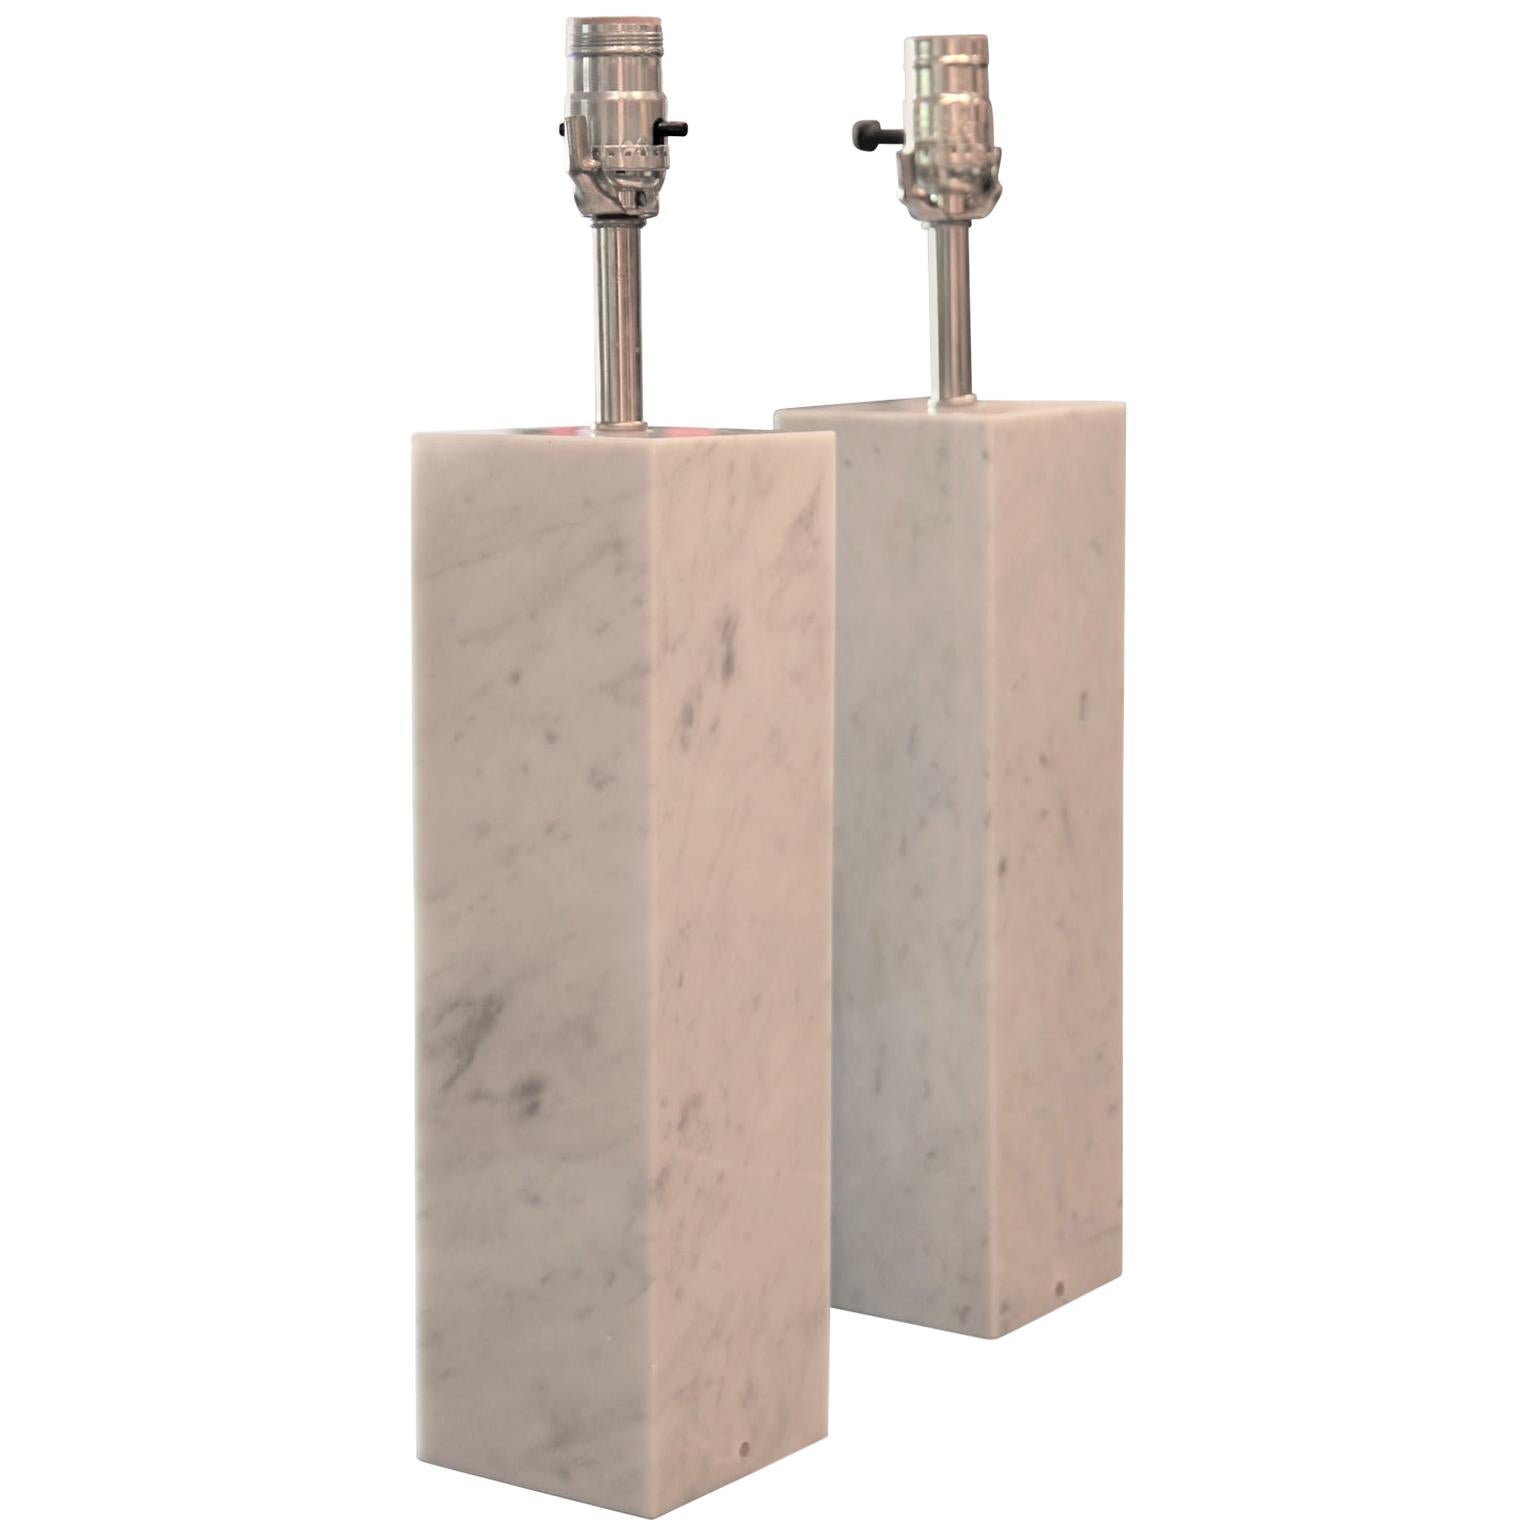 Pair of Rectangular White Marble Lamps Designed by Nessen Lamps